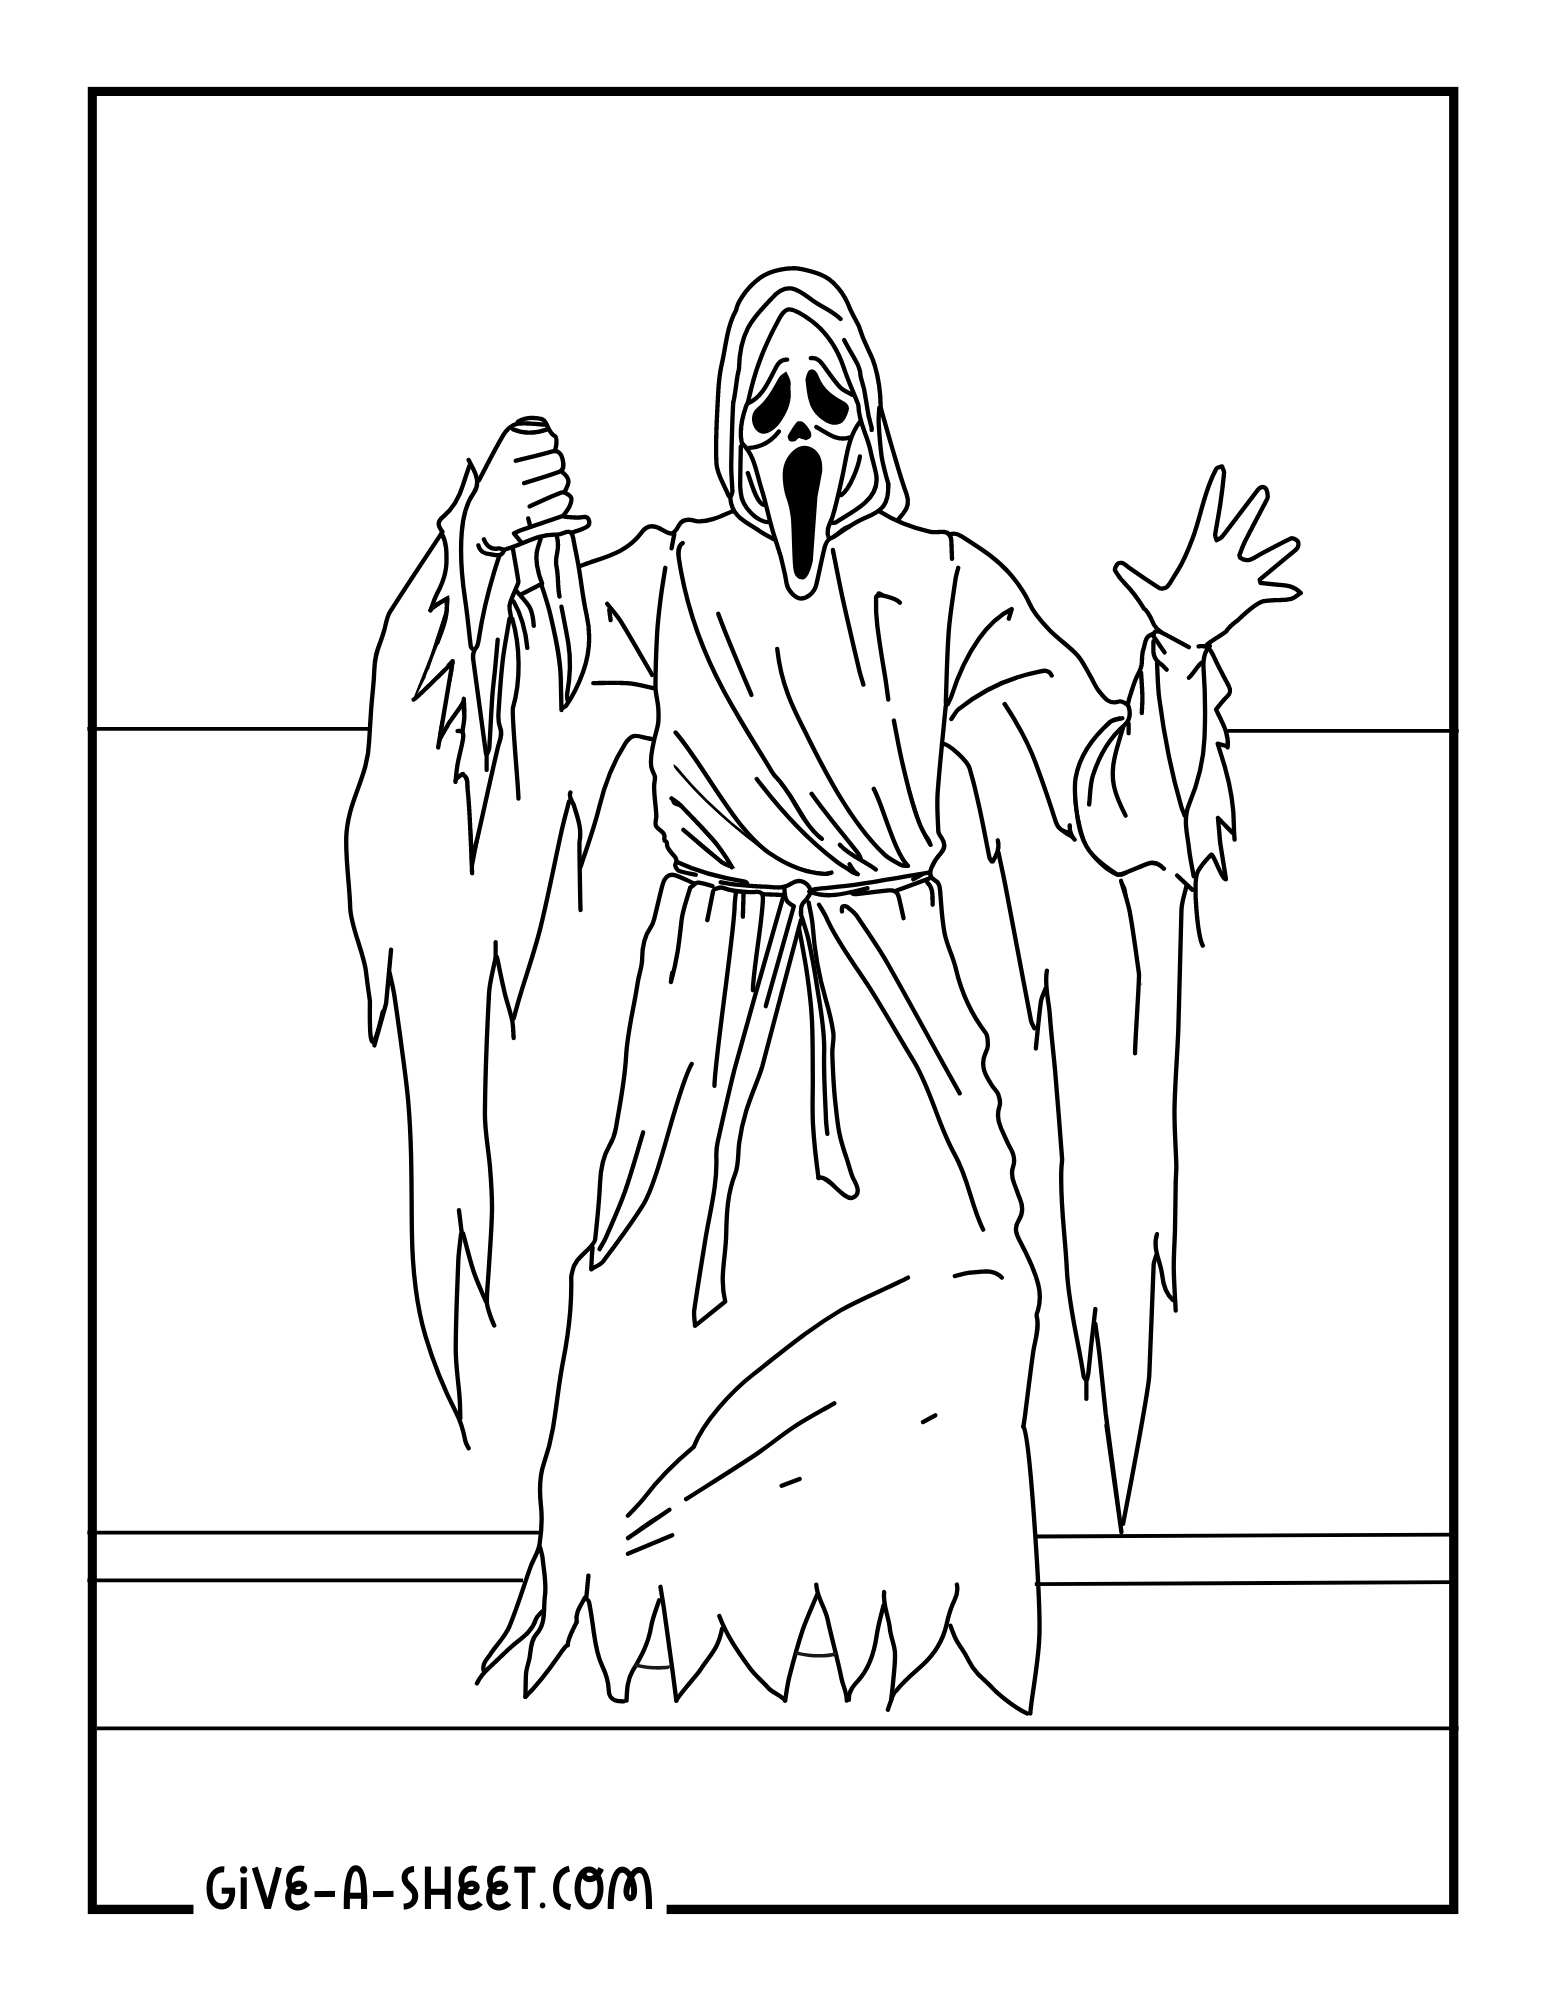 Ghostface with knife coloring sheet.